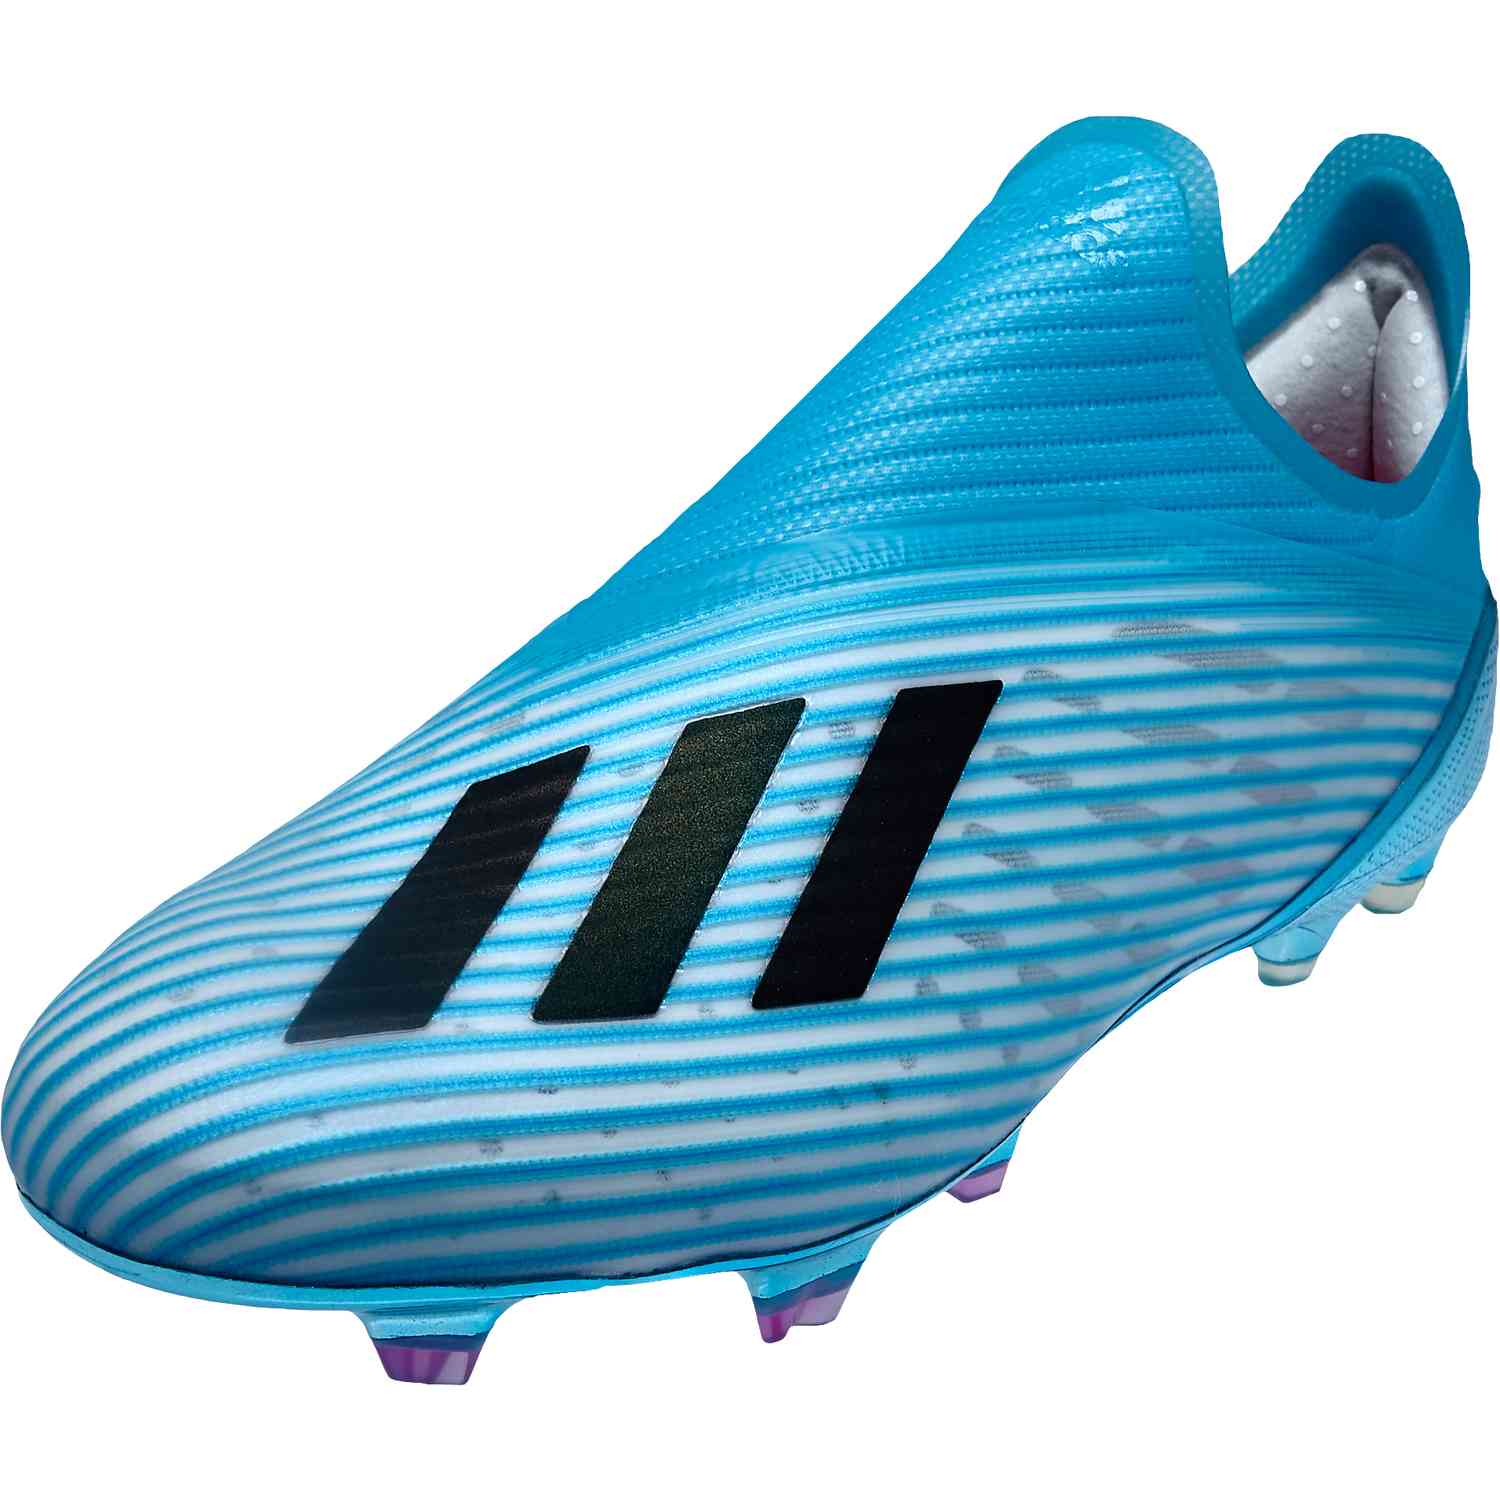 x19 soccer cleats